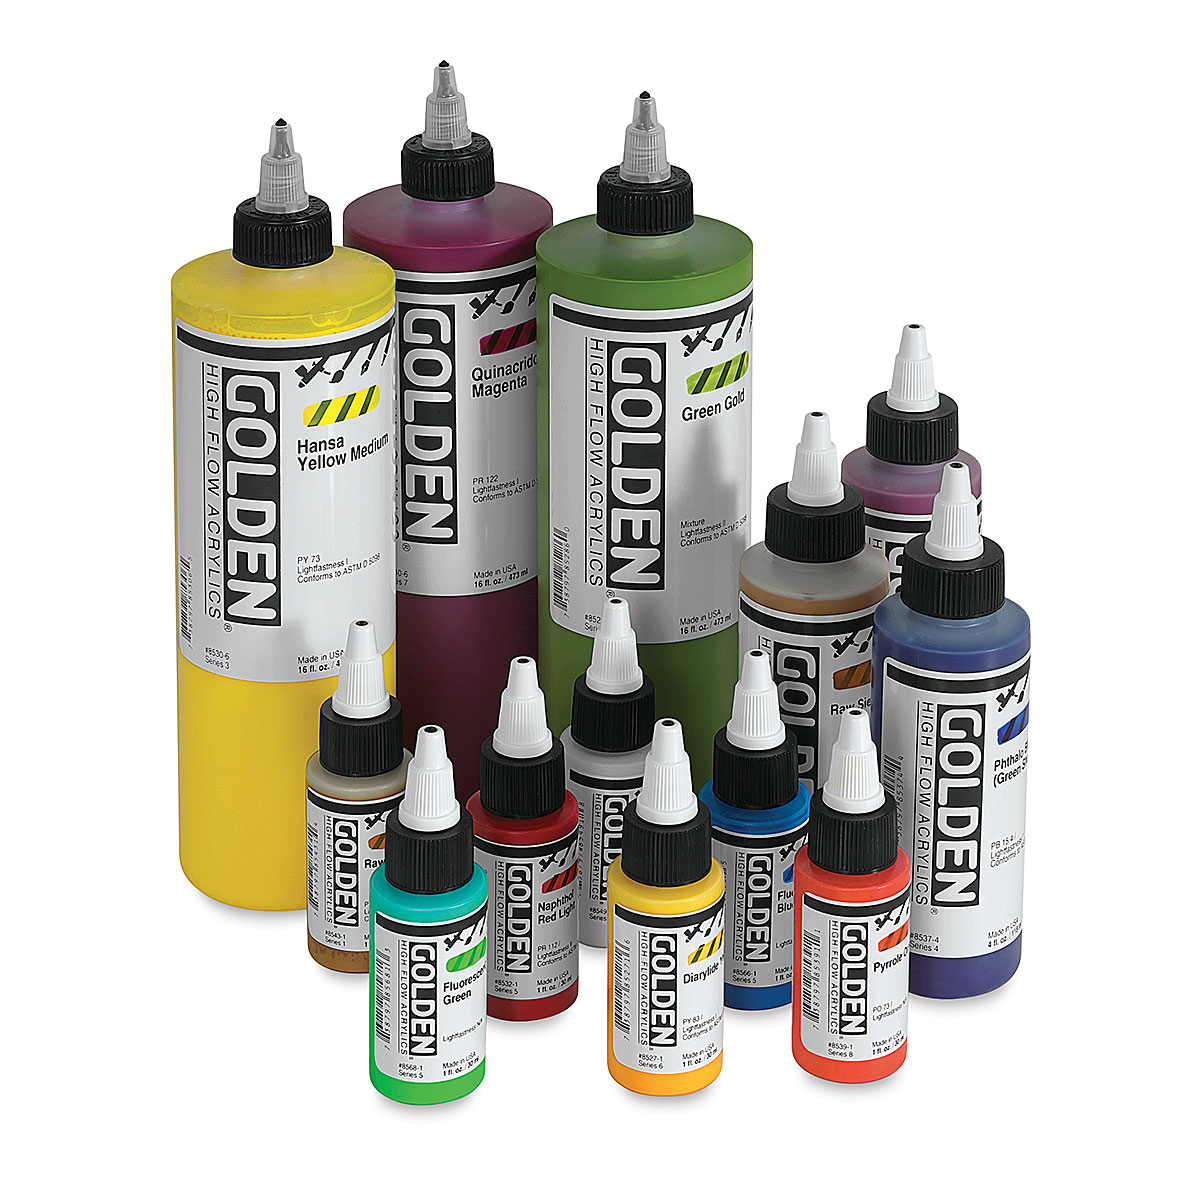 Golden High Flow Acrylic Paints and Sets